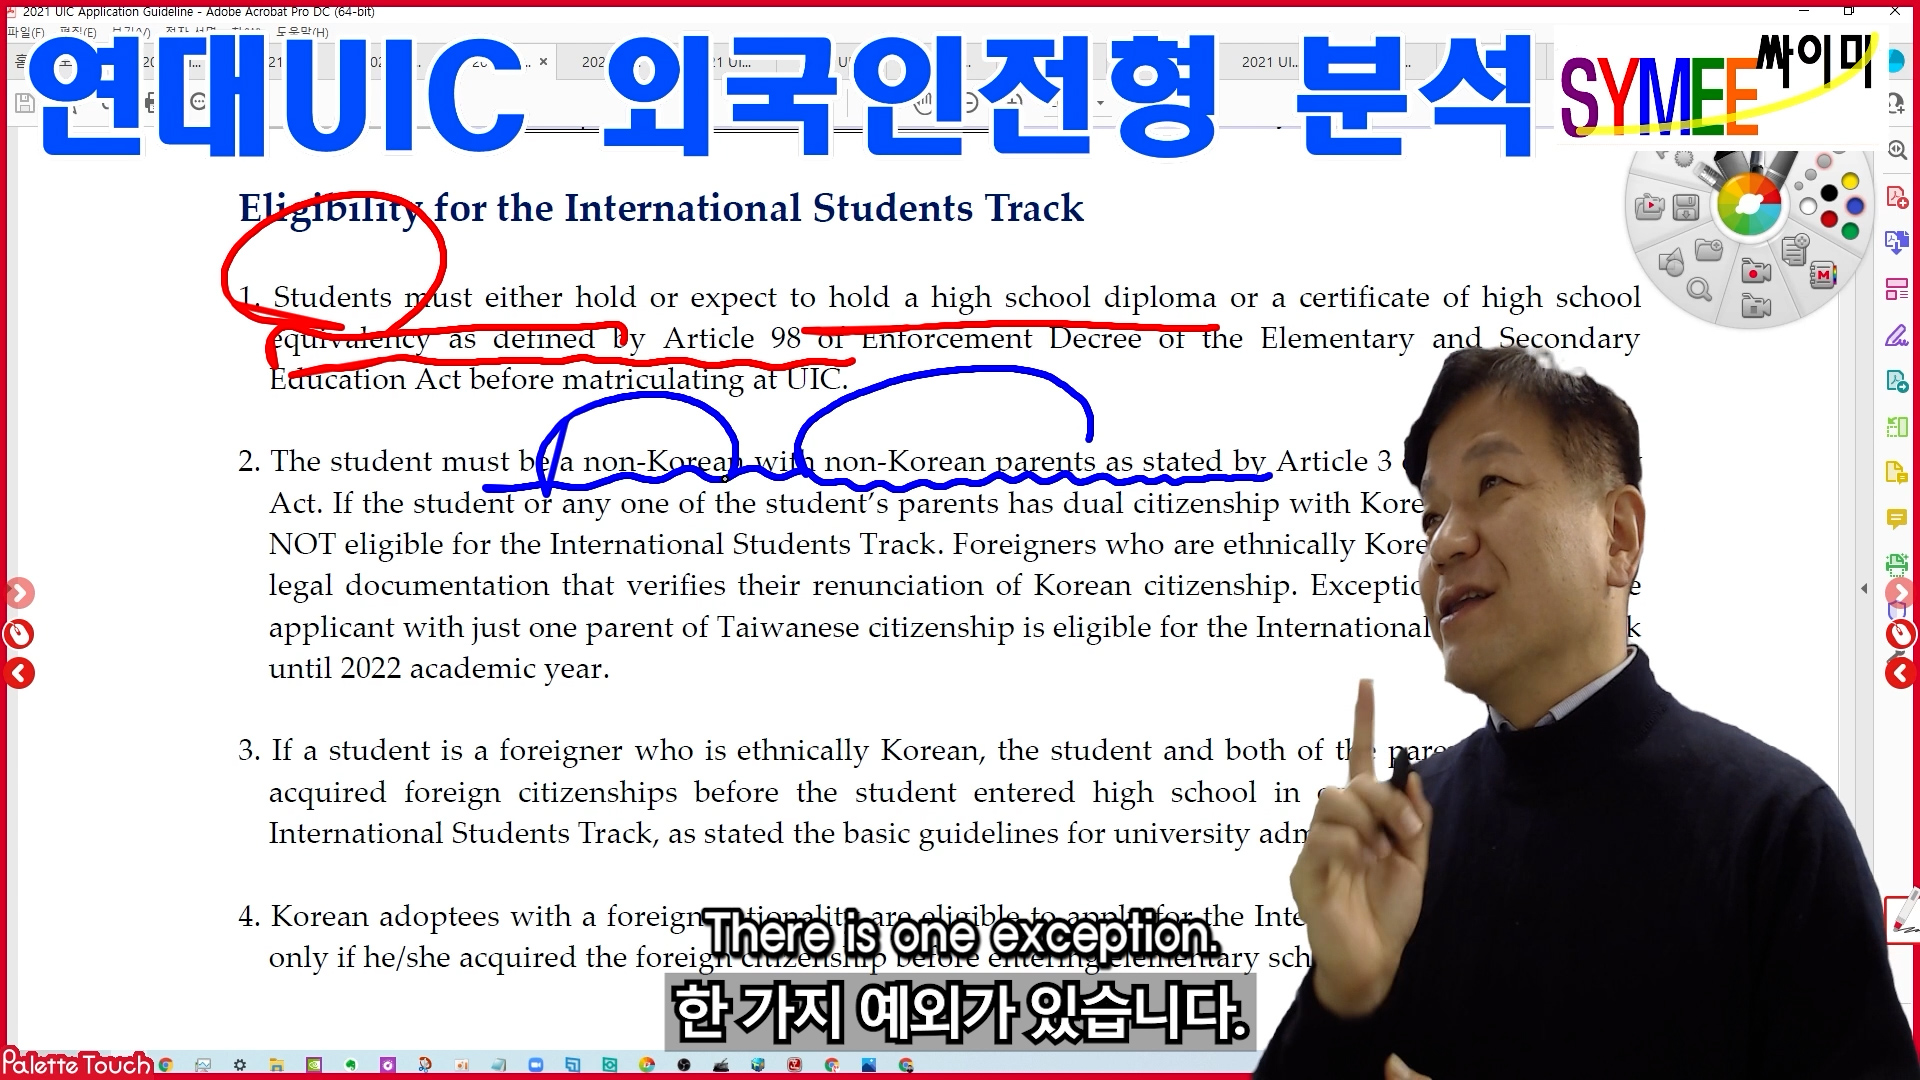 Yonsei Univ. Admission for UIC for Foreign Student 02 Qualifications.00_04_21_08.스틸 009.jpg